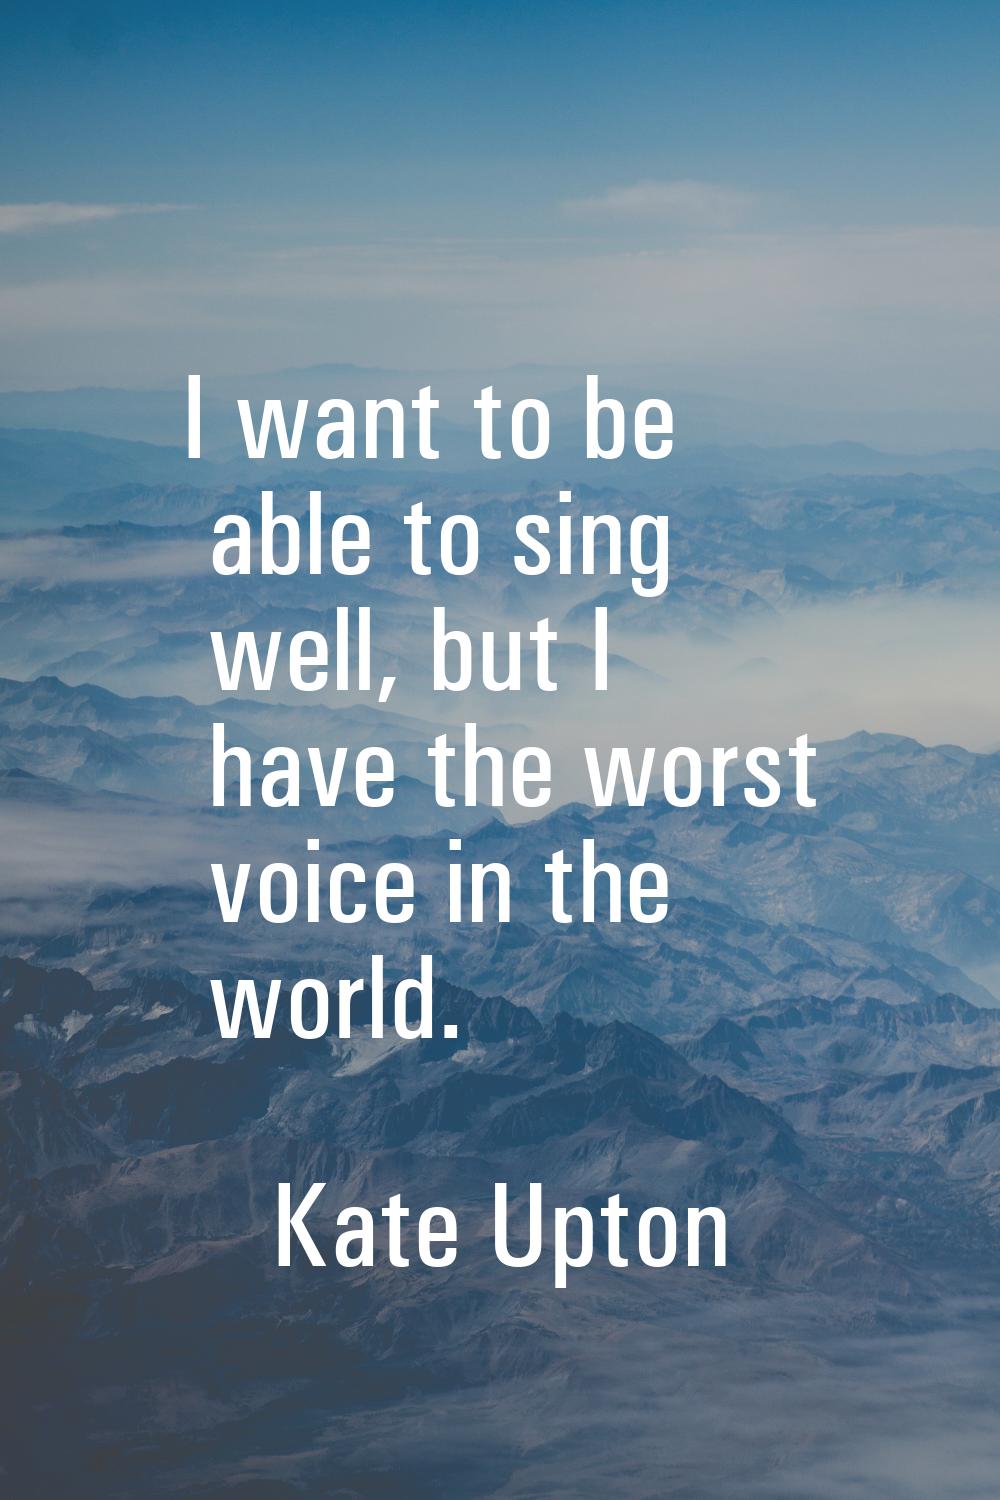 I want to be able to sing well, but I have the worst voice in the world.